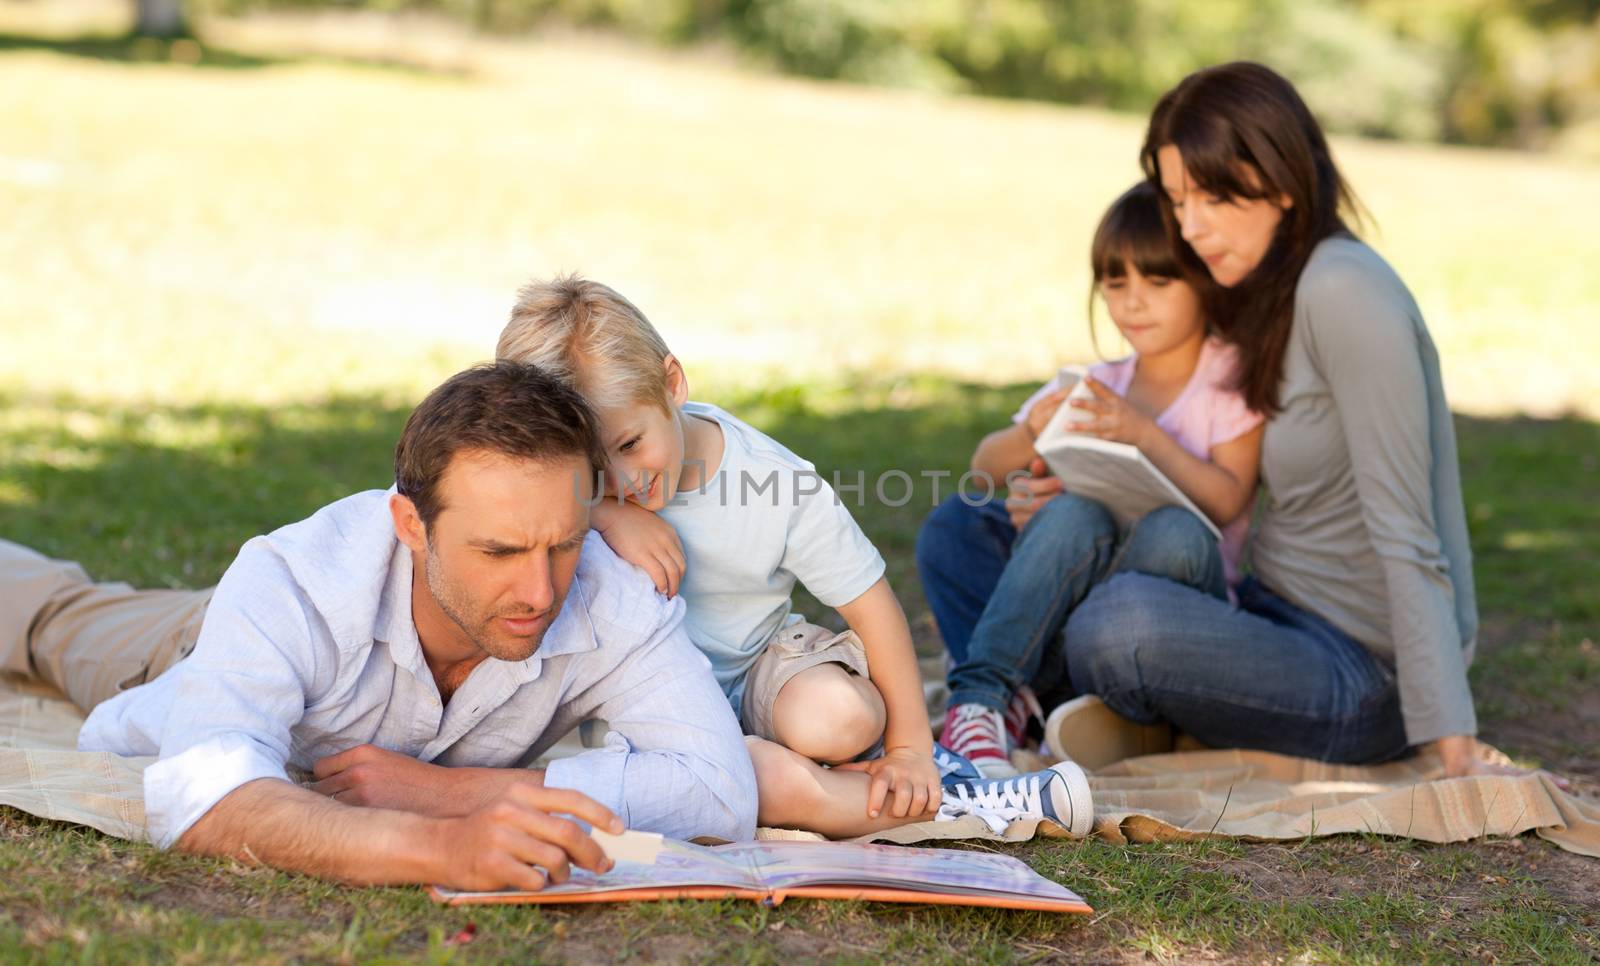 Family in the park together by Wavebreakmedia